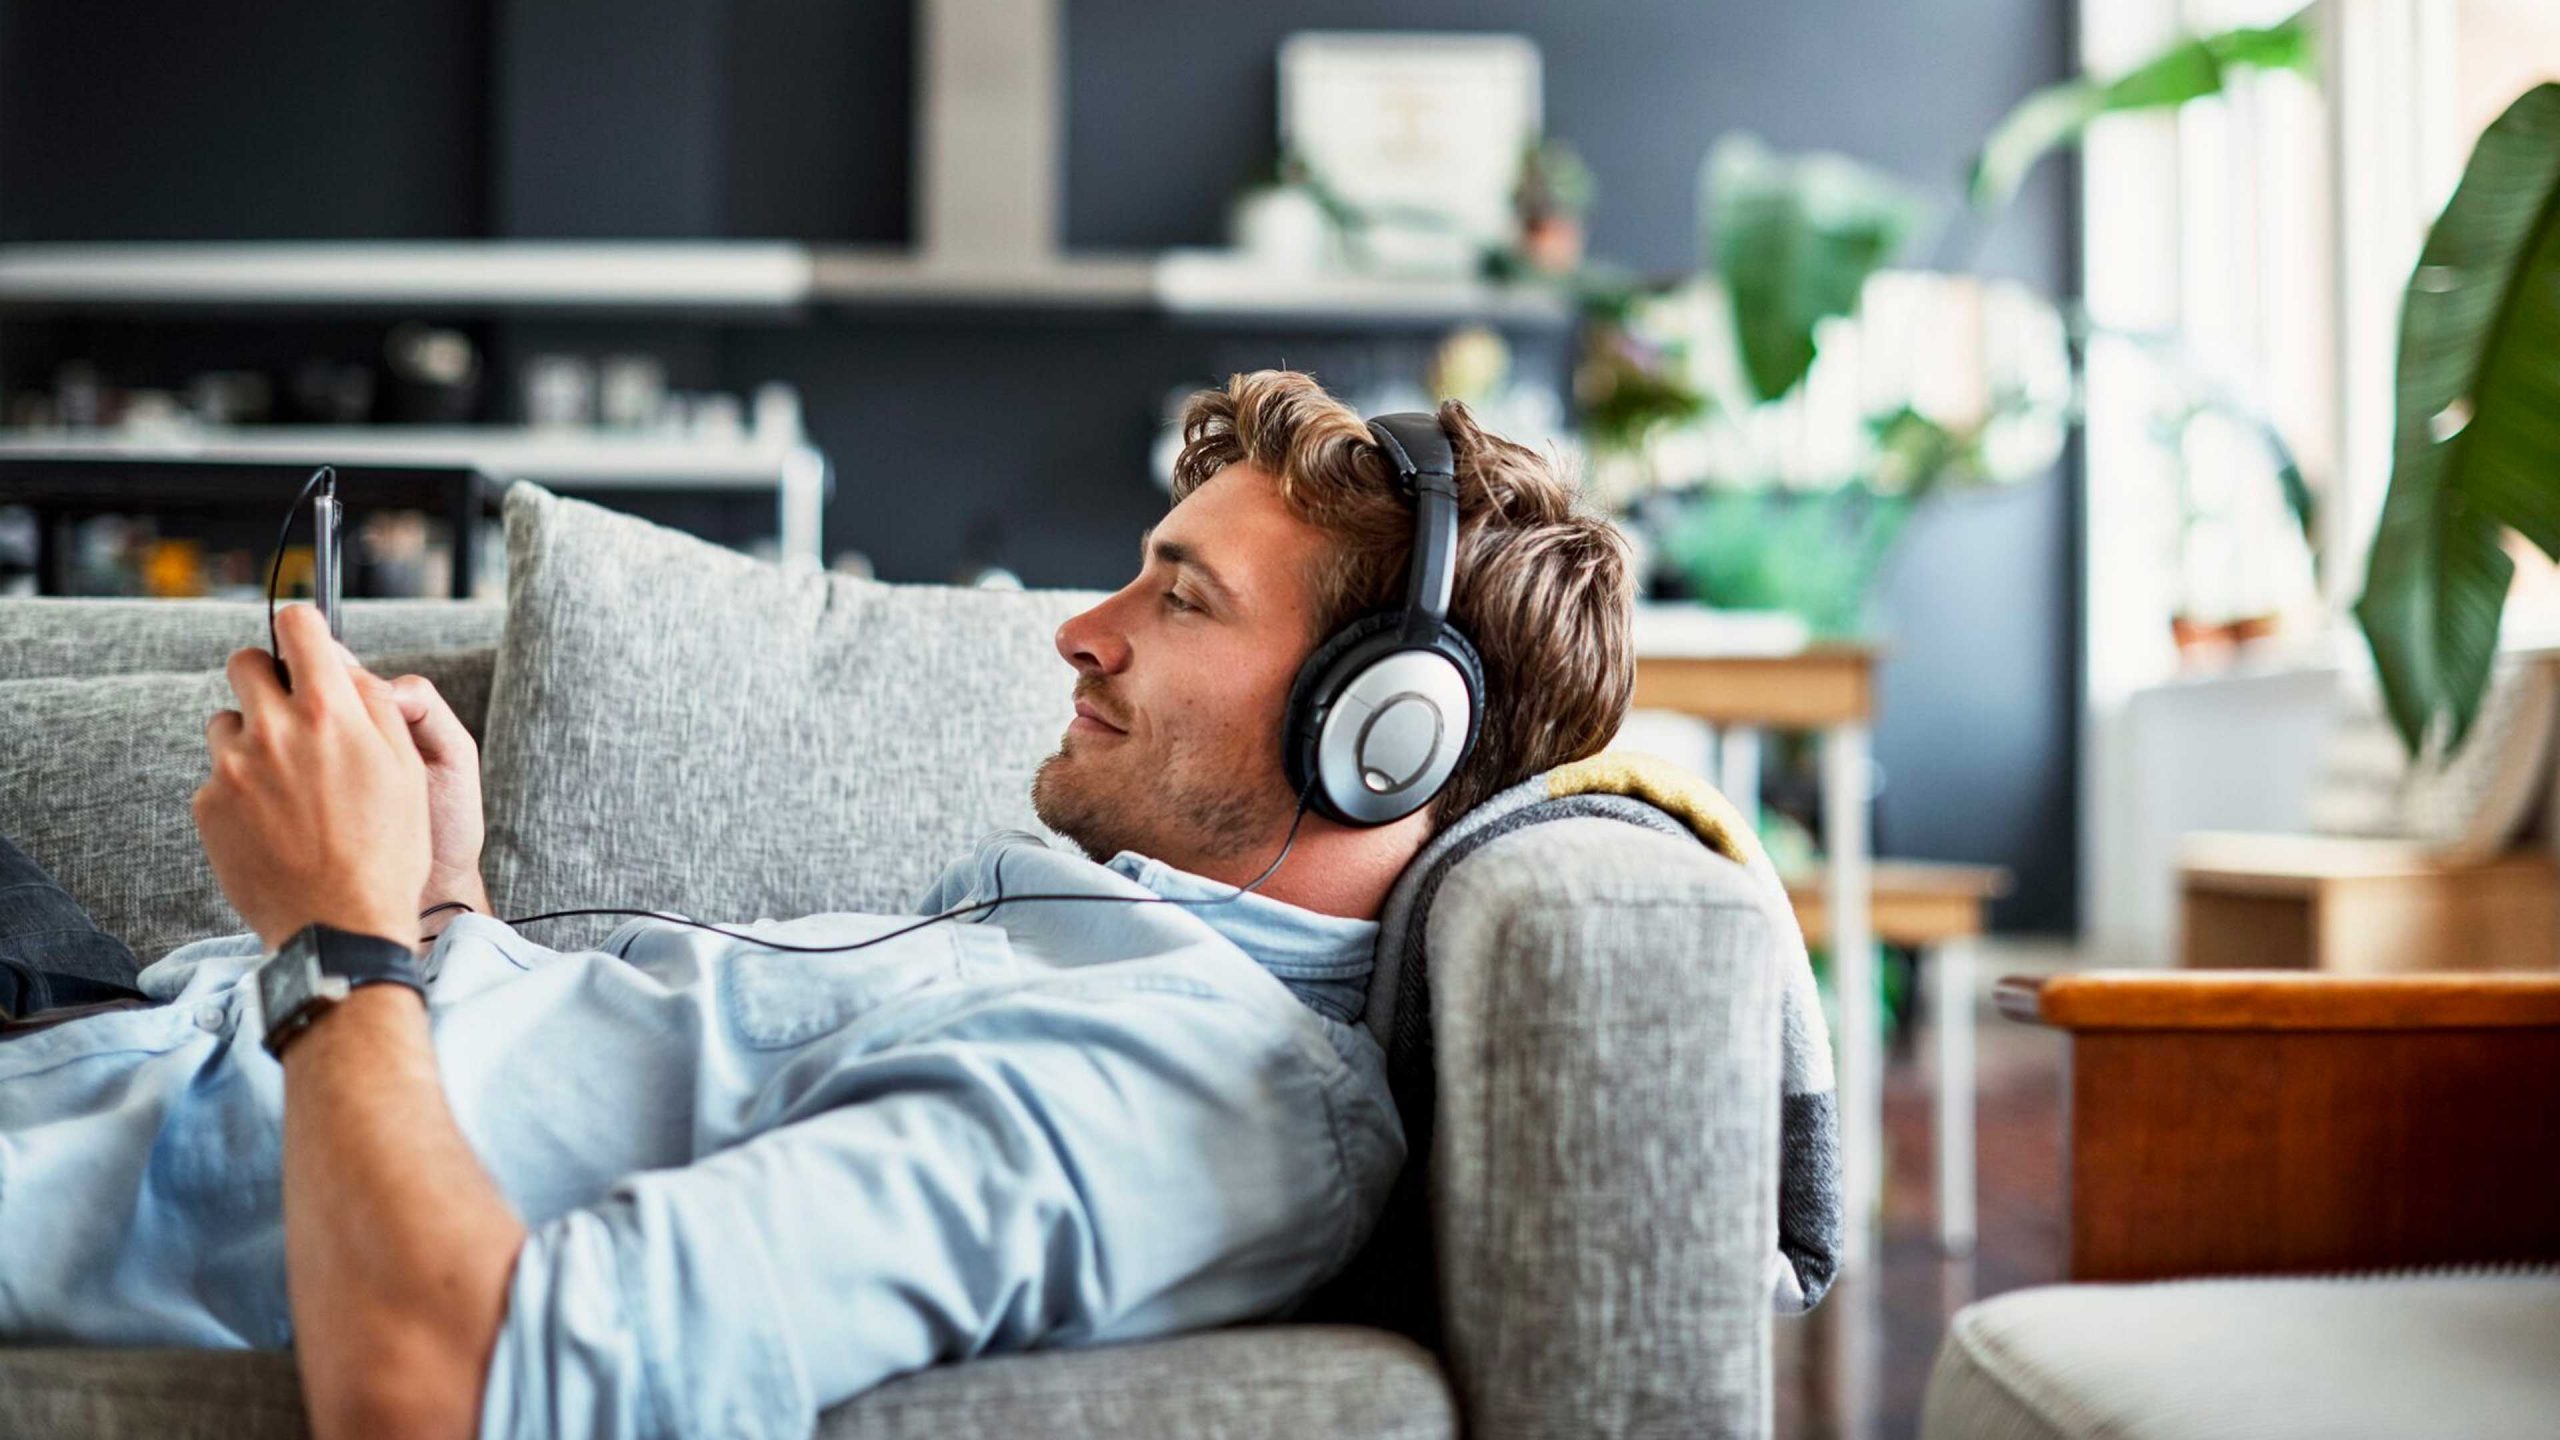 how to listen to podcasts